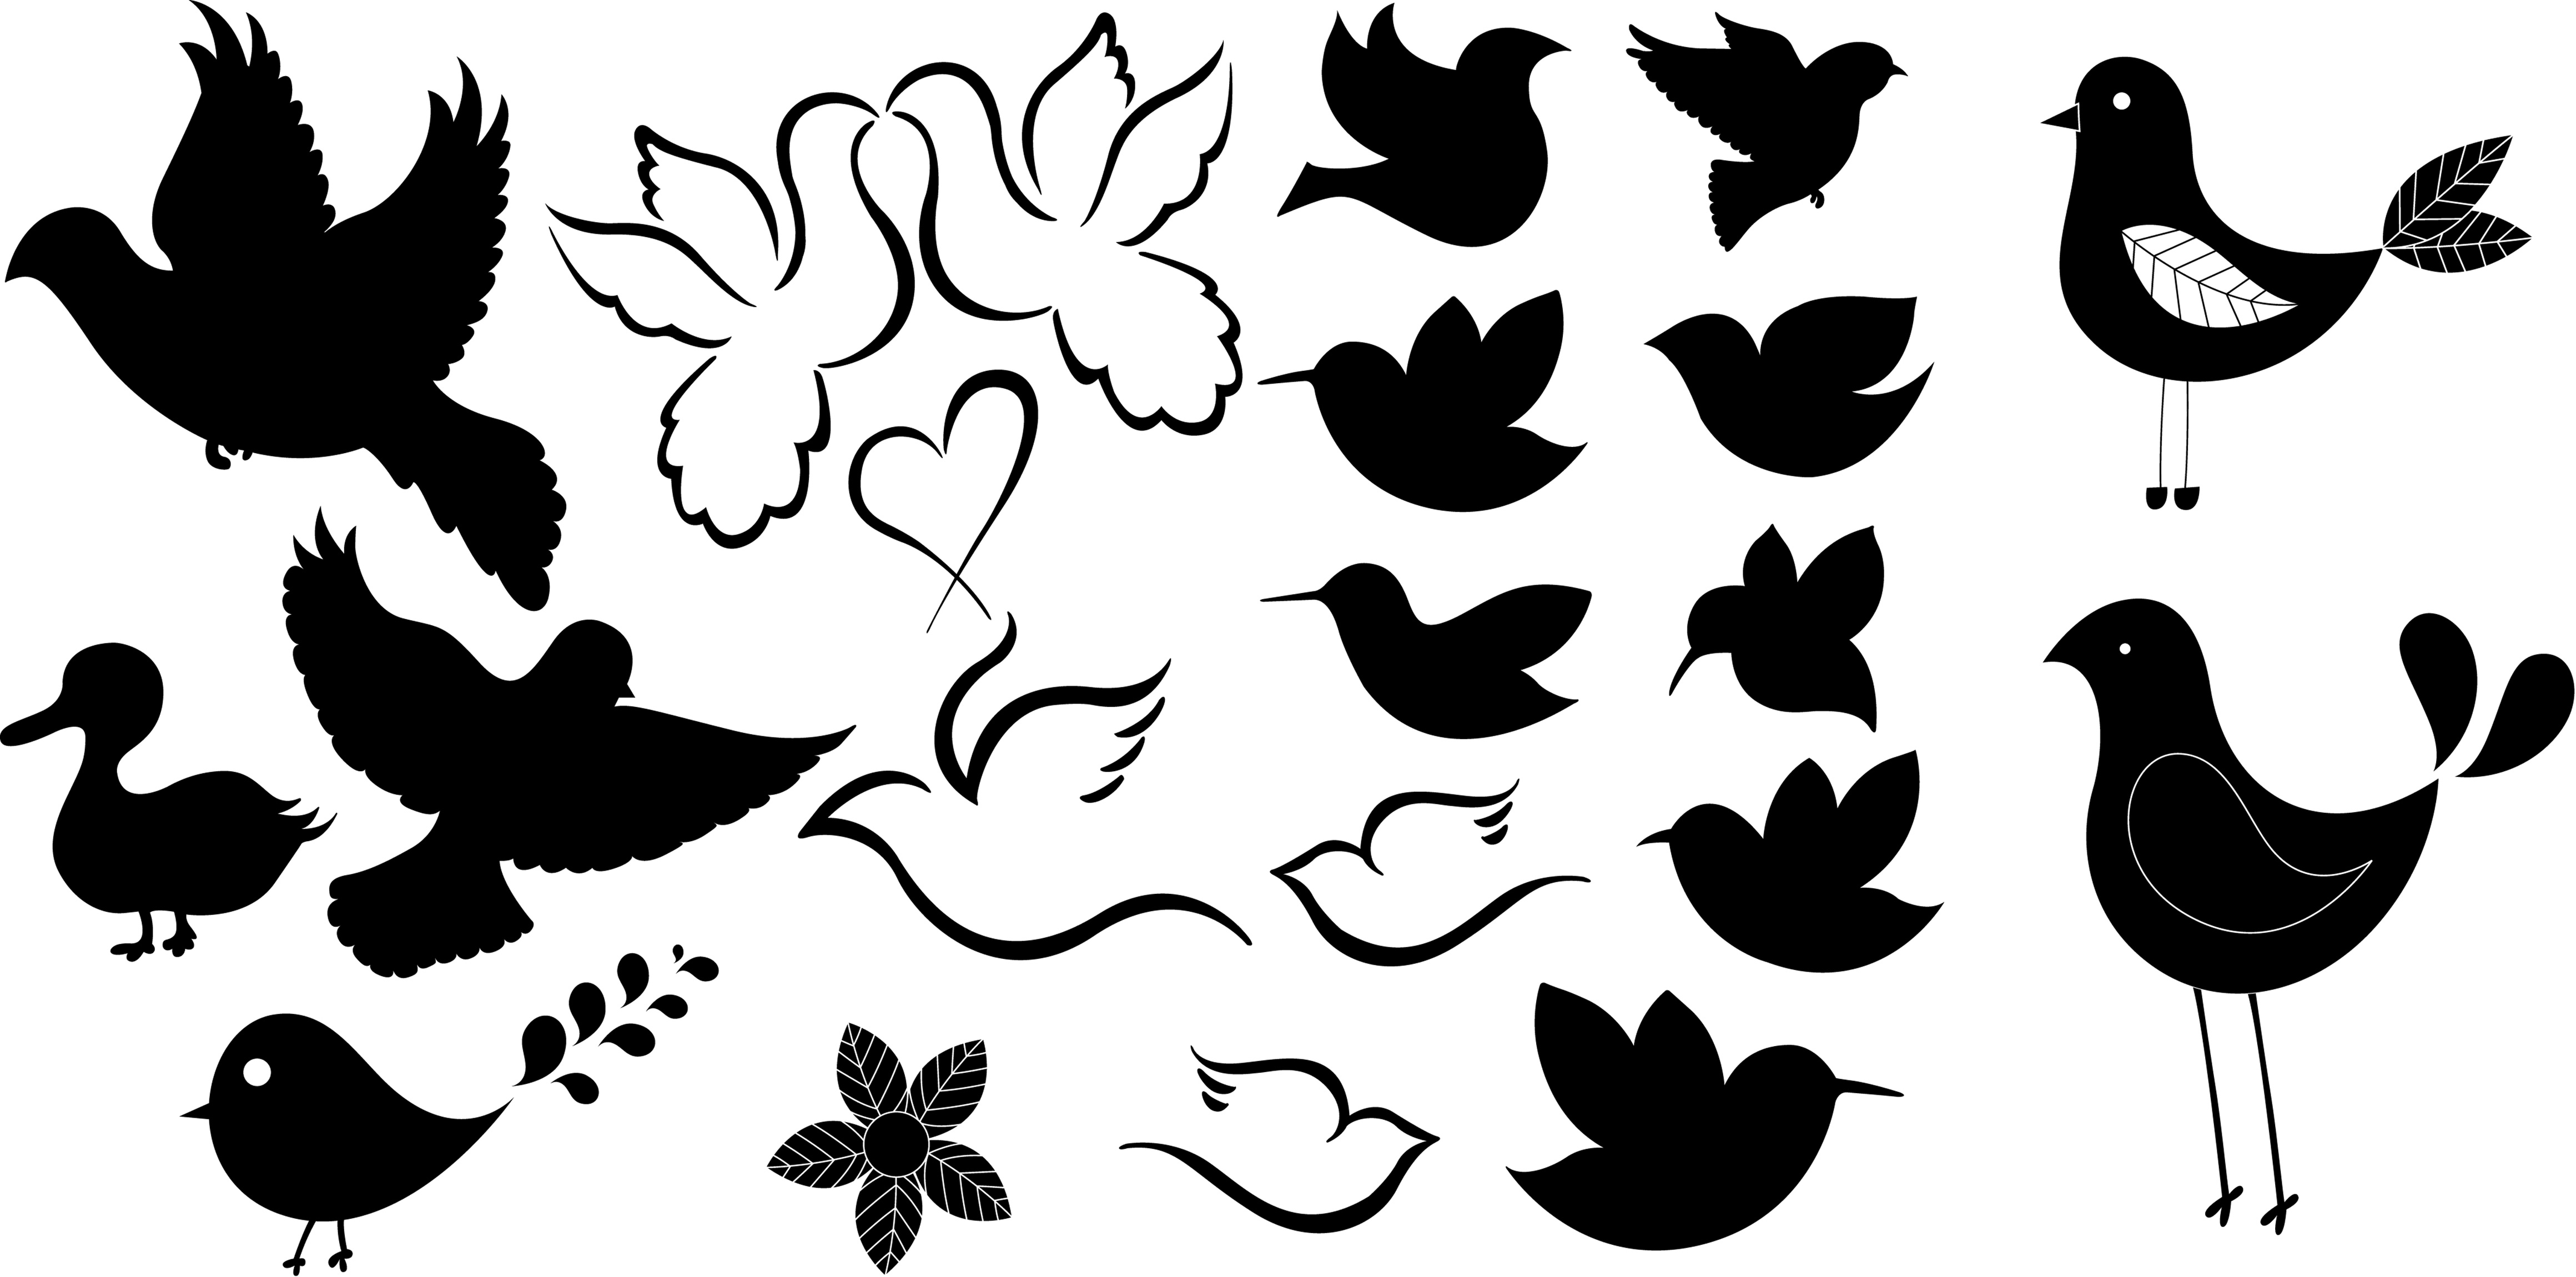 Free Flying Birds Vector Shapes   Photoshop Graphics And Add Ons